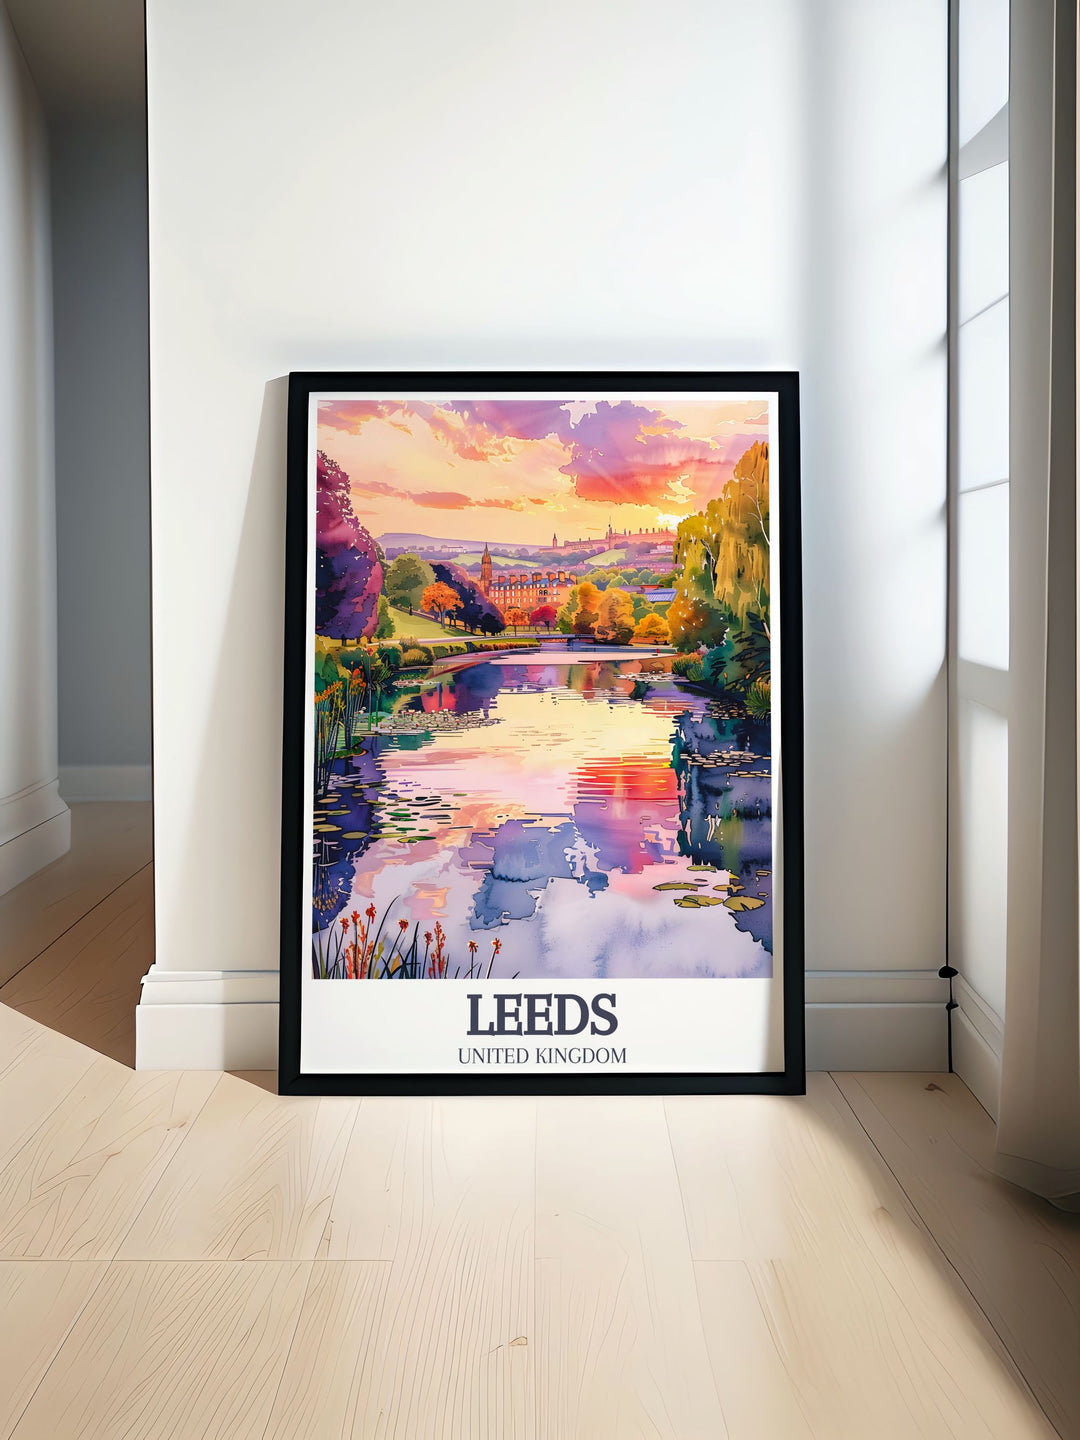 Beautiful Roundhay Park and Waterloo Lake print capturing the tranquil beauty of Leeds. Perfect for enhancing your England wall decor and adding a touch of natural elegance to your home with this stunning Roundhay Park wall art.